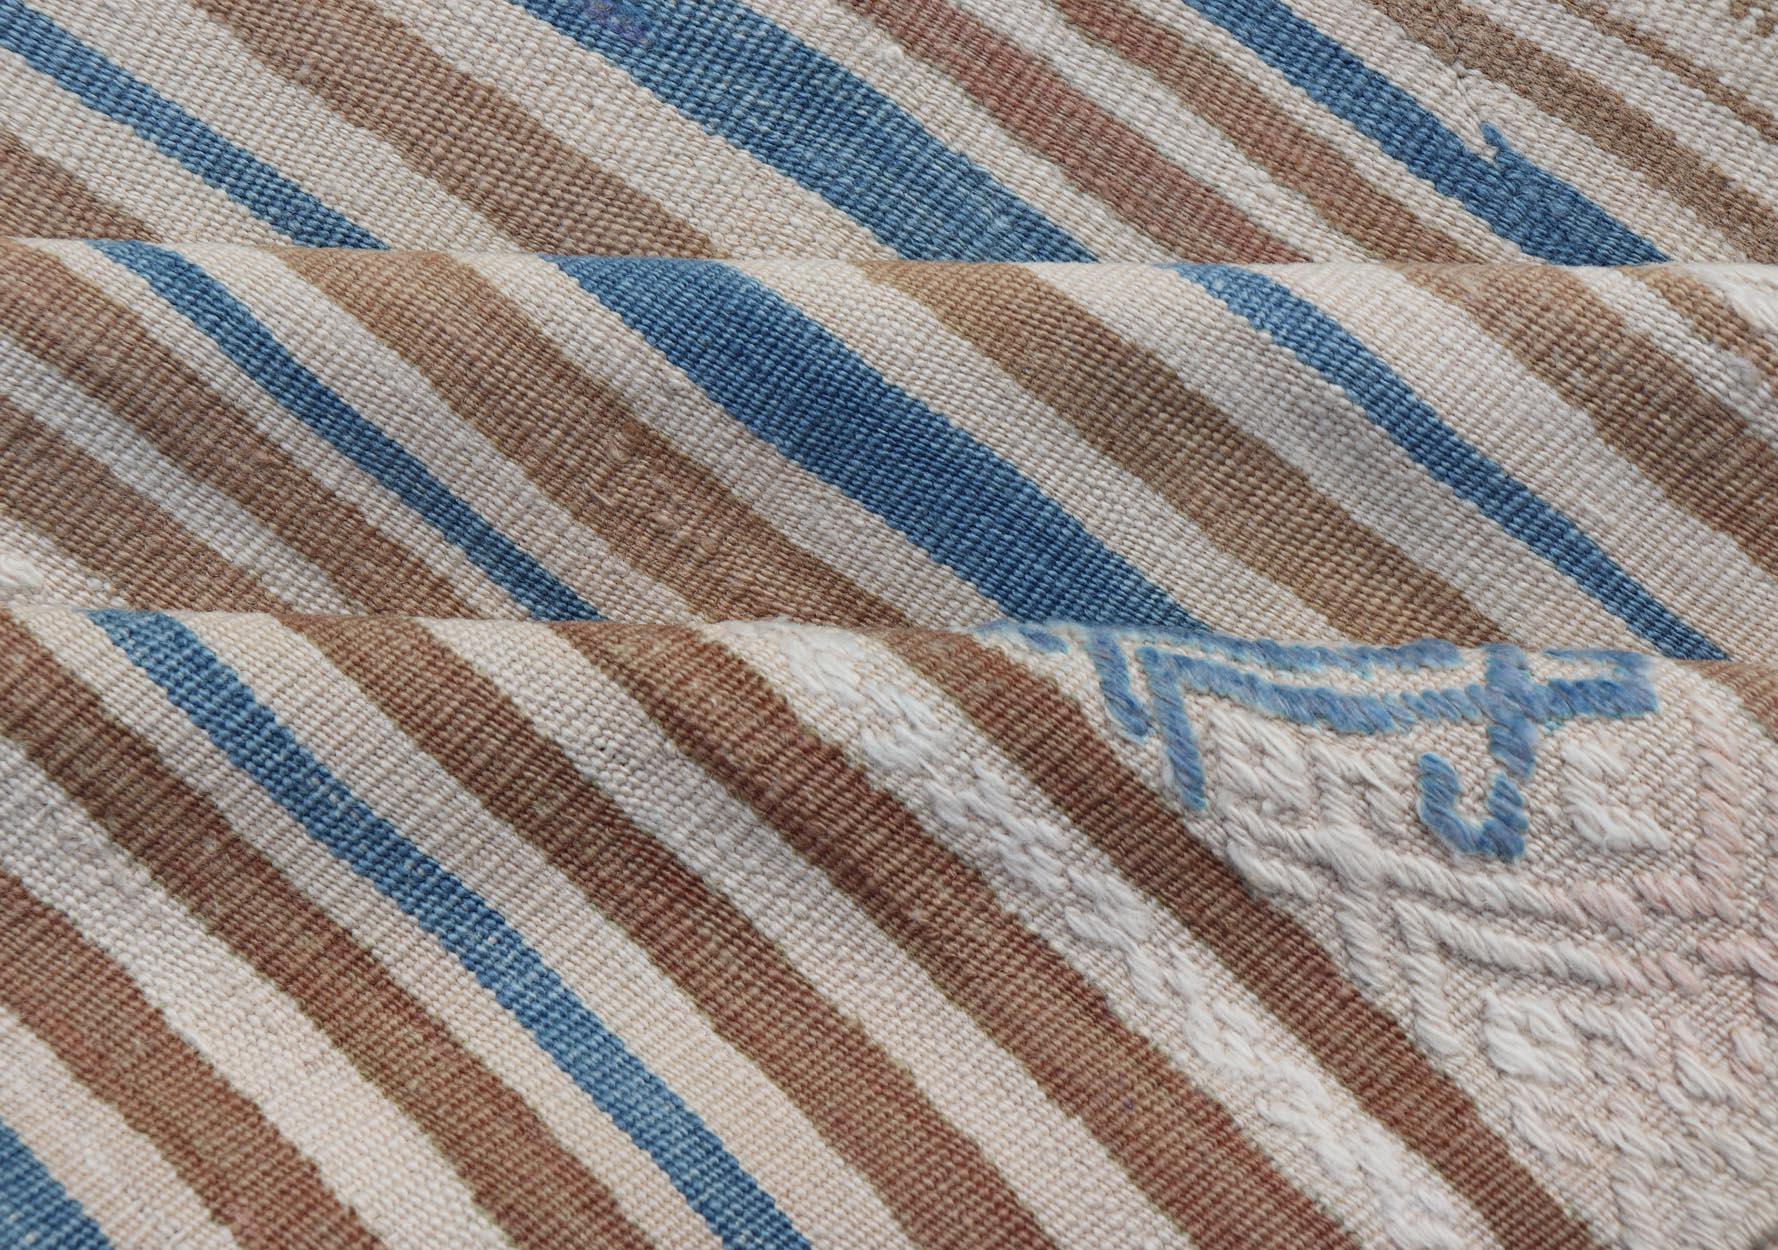 Turkish Hand Woven Flat-Weave Embroideries Kilim in Taupe, Brown, and Blue  4